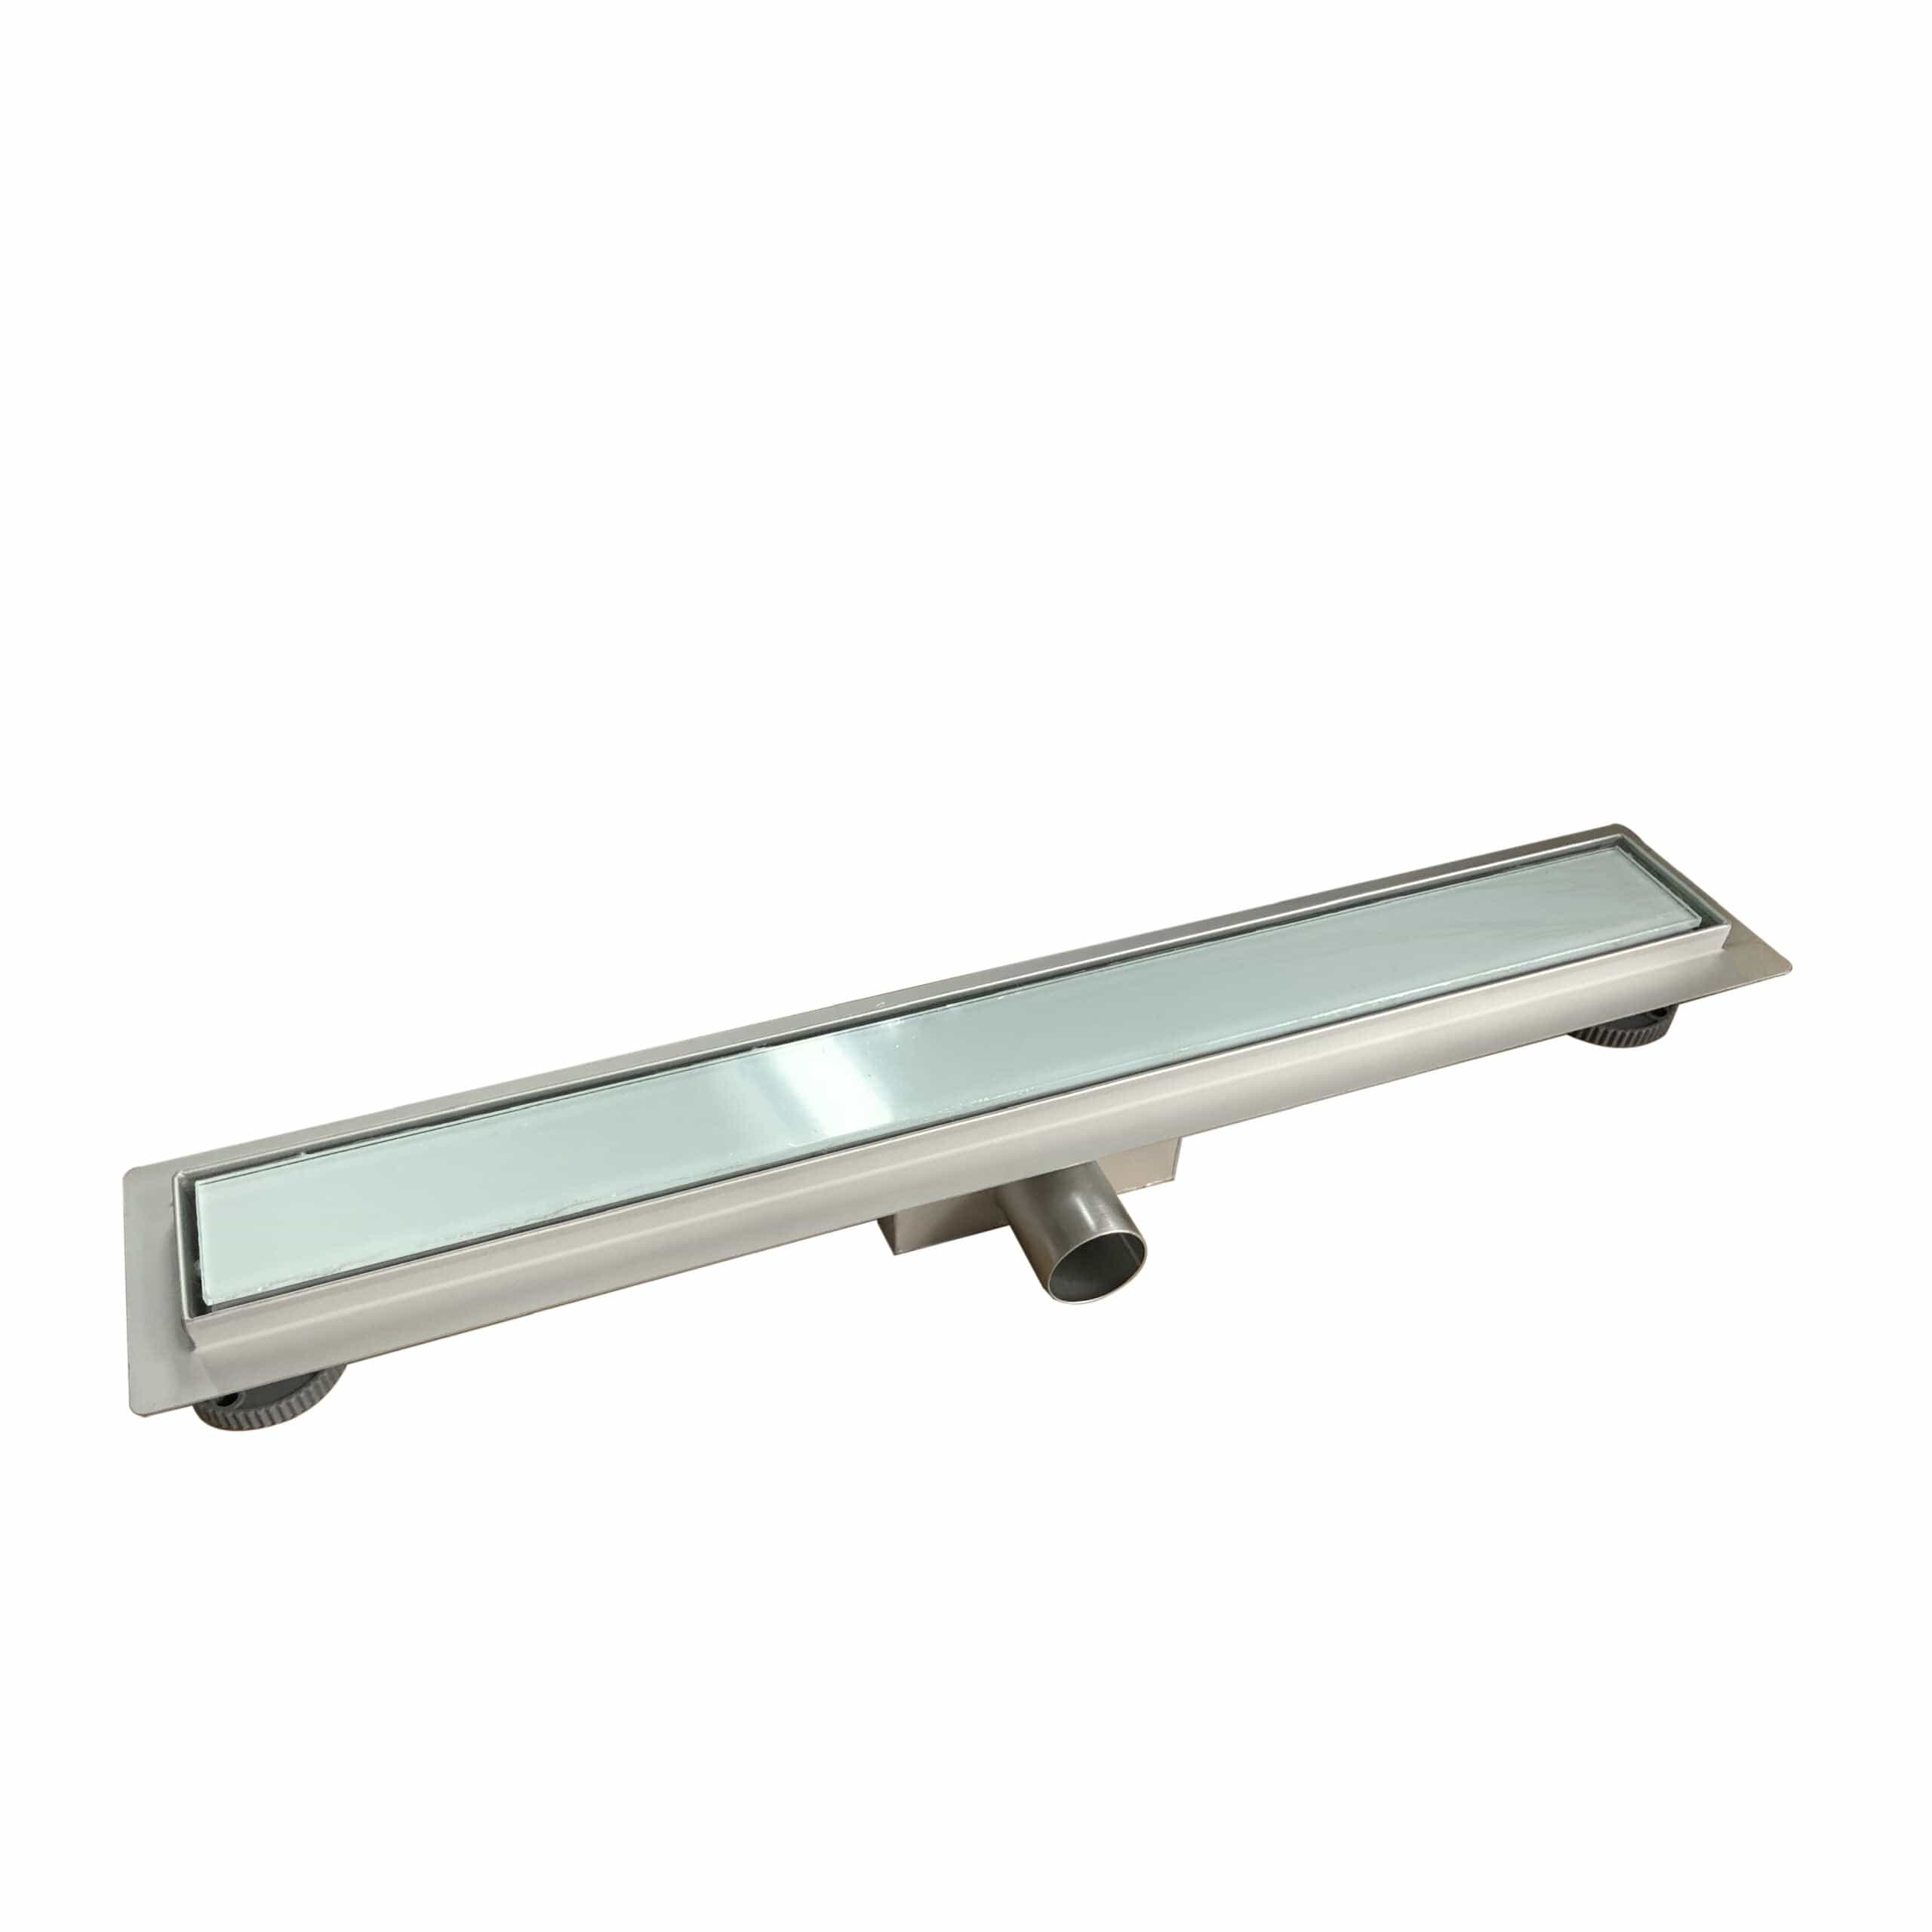 Tredex Linear Drain With Horizontal Outlet (P-trap) 600X70X67mm | Supply Master | Accra, Ghana Bathroom Accessories Buy Tools hardware Building materials